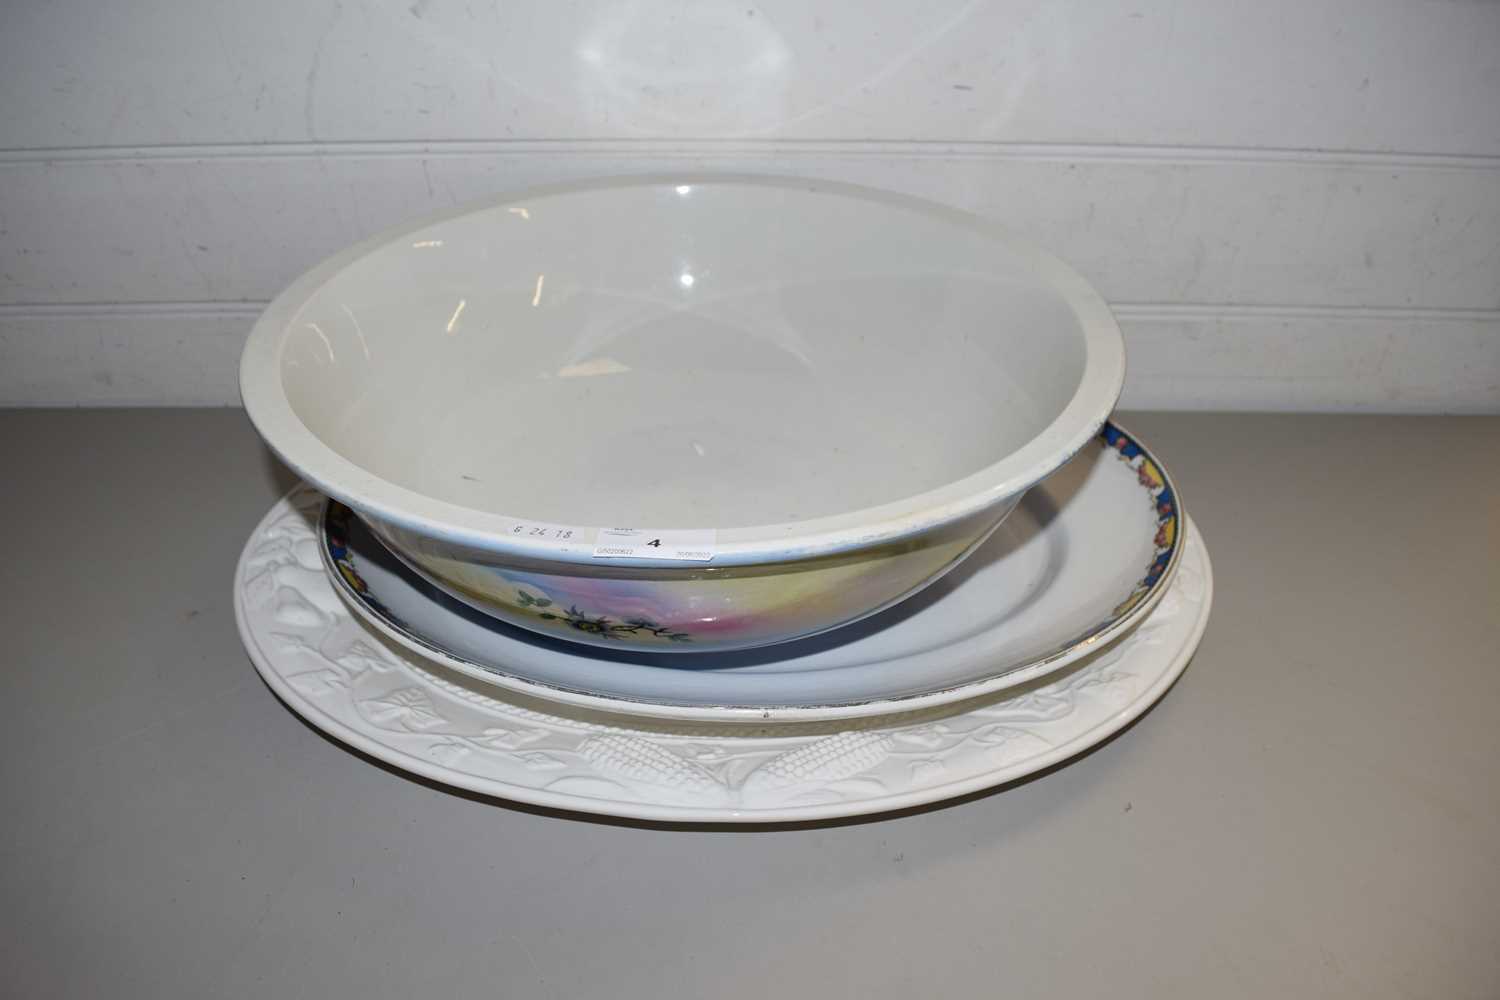 MEAT PLATES AND A WASH BOWL